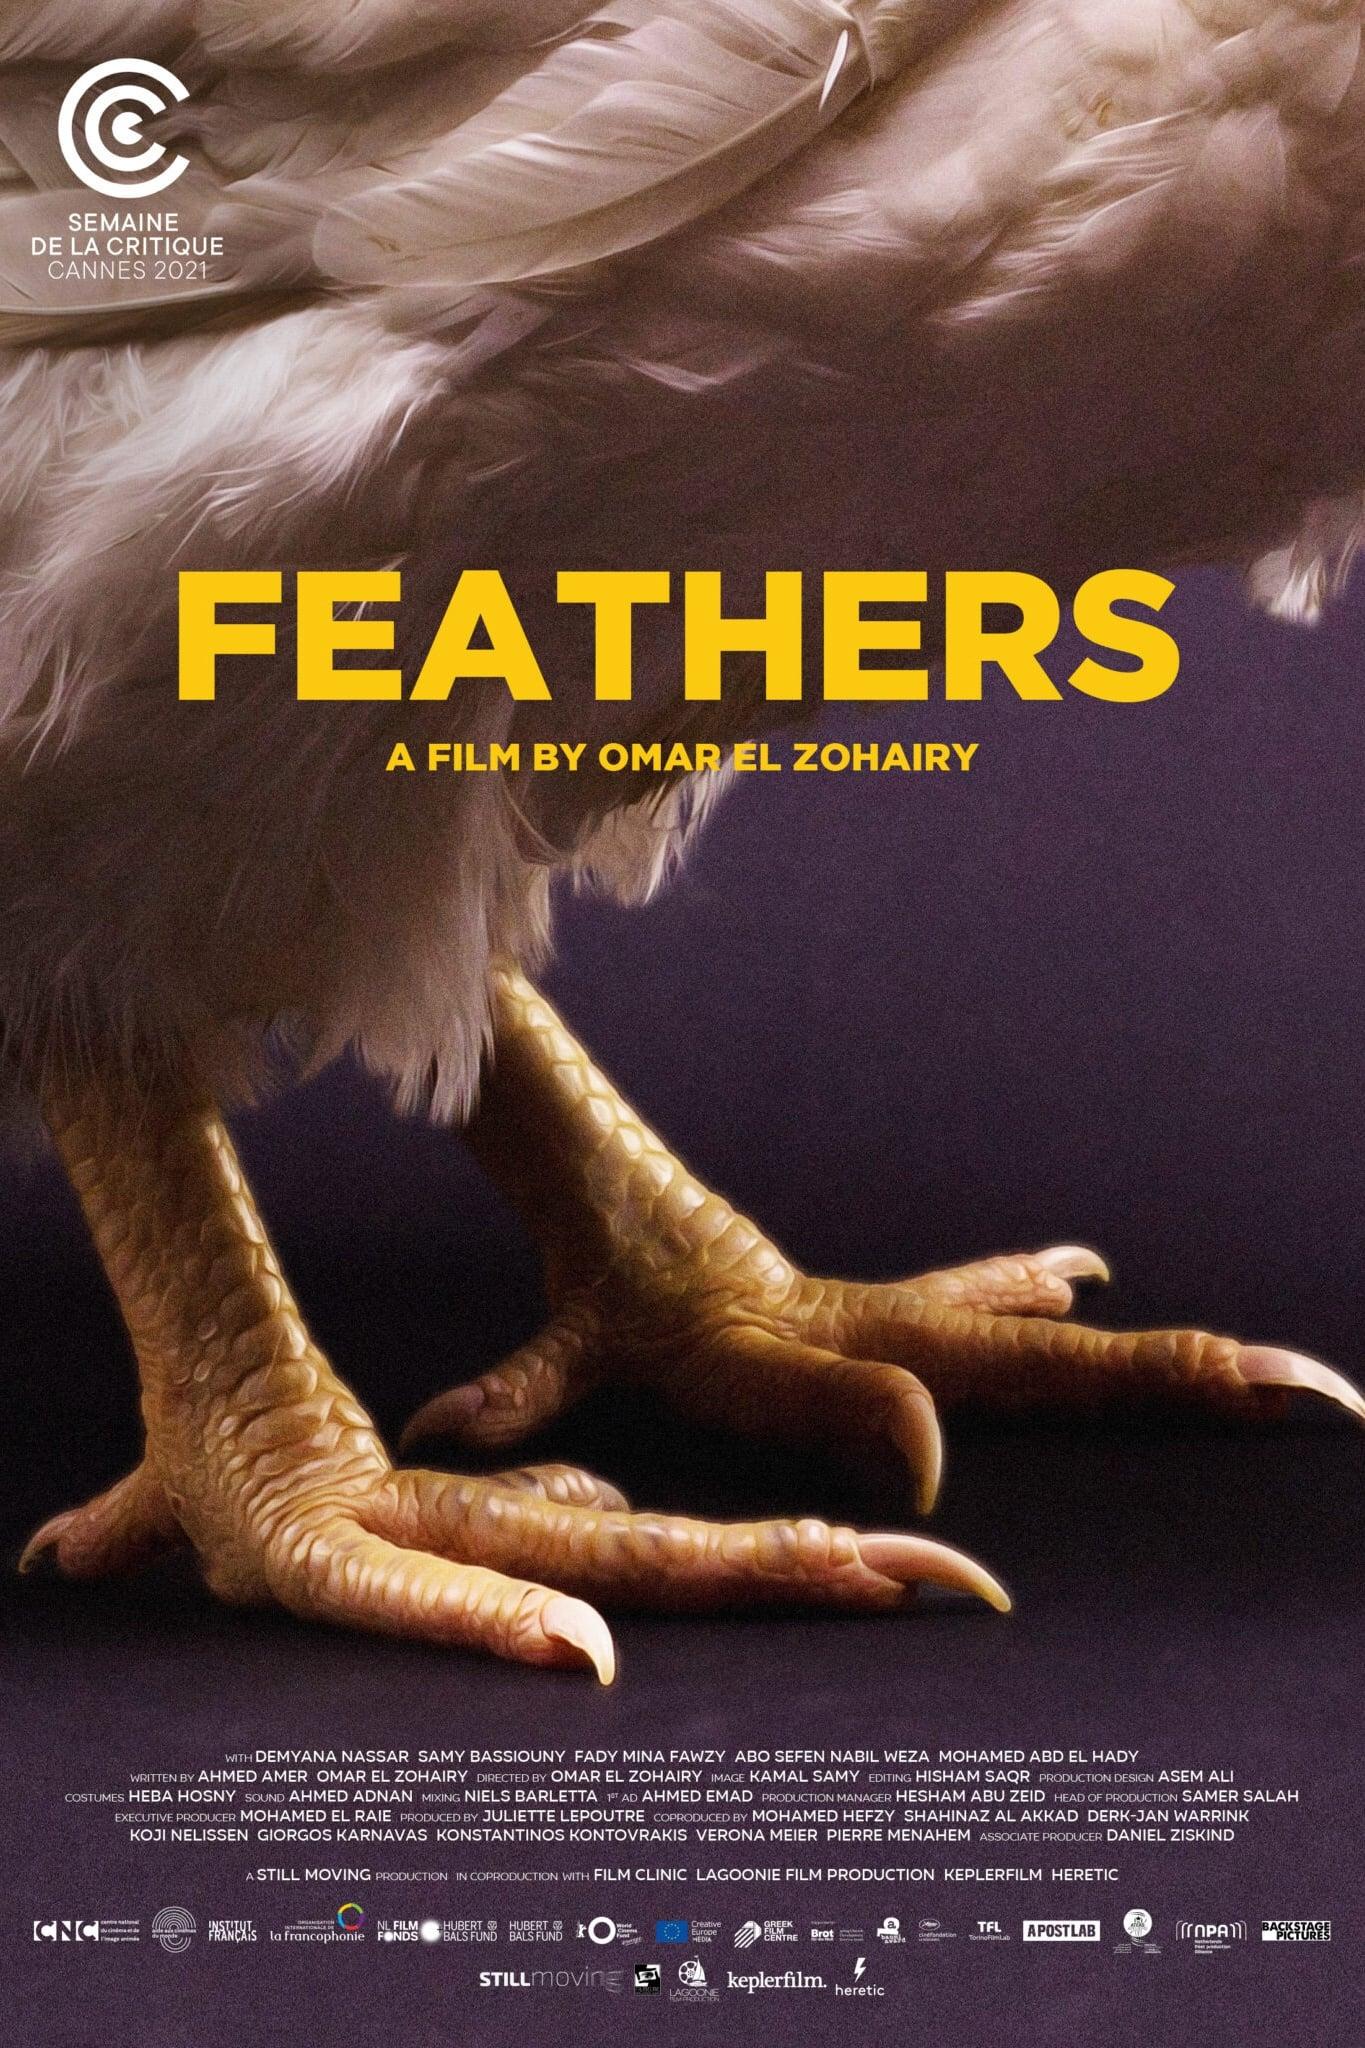 Feathers poster